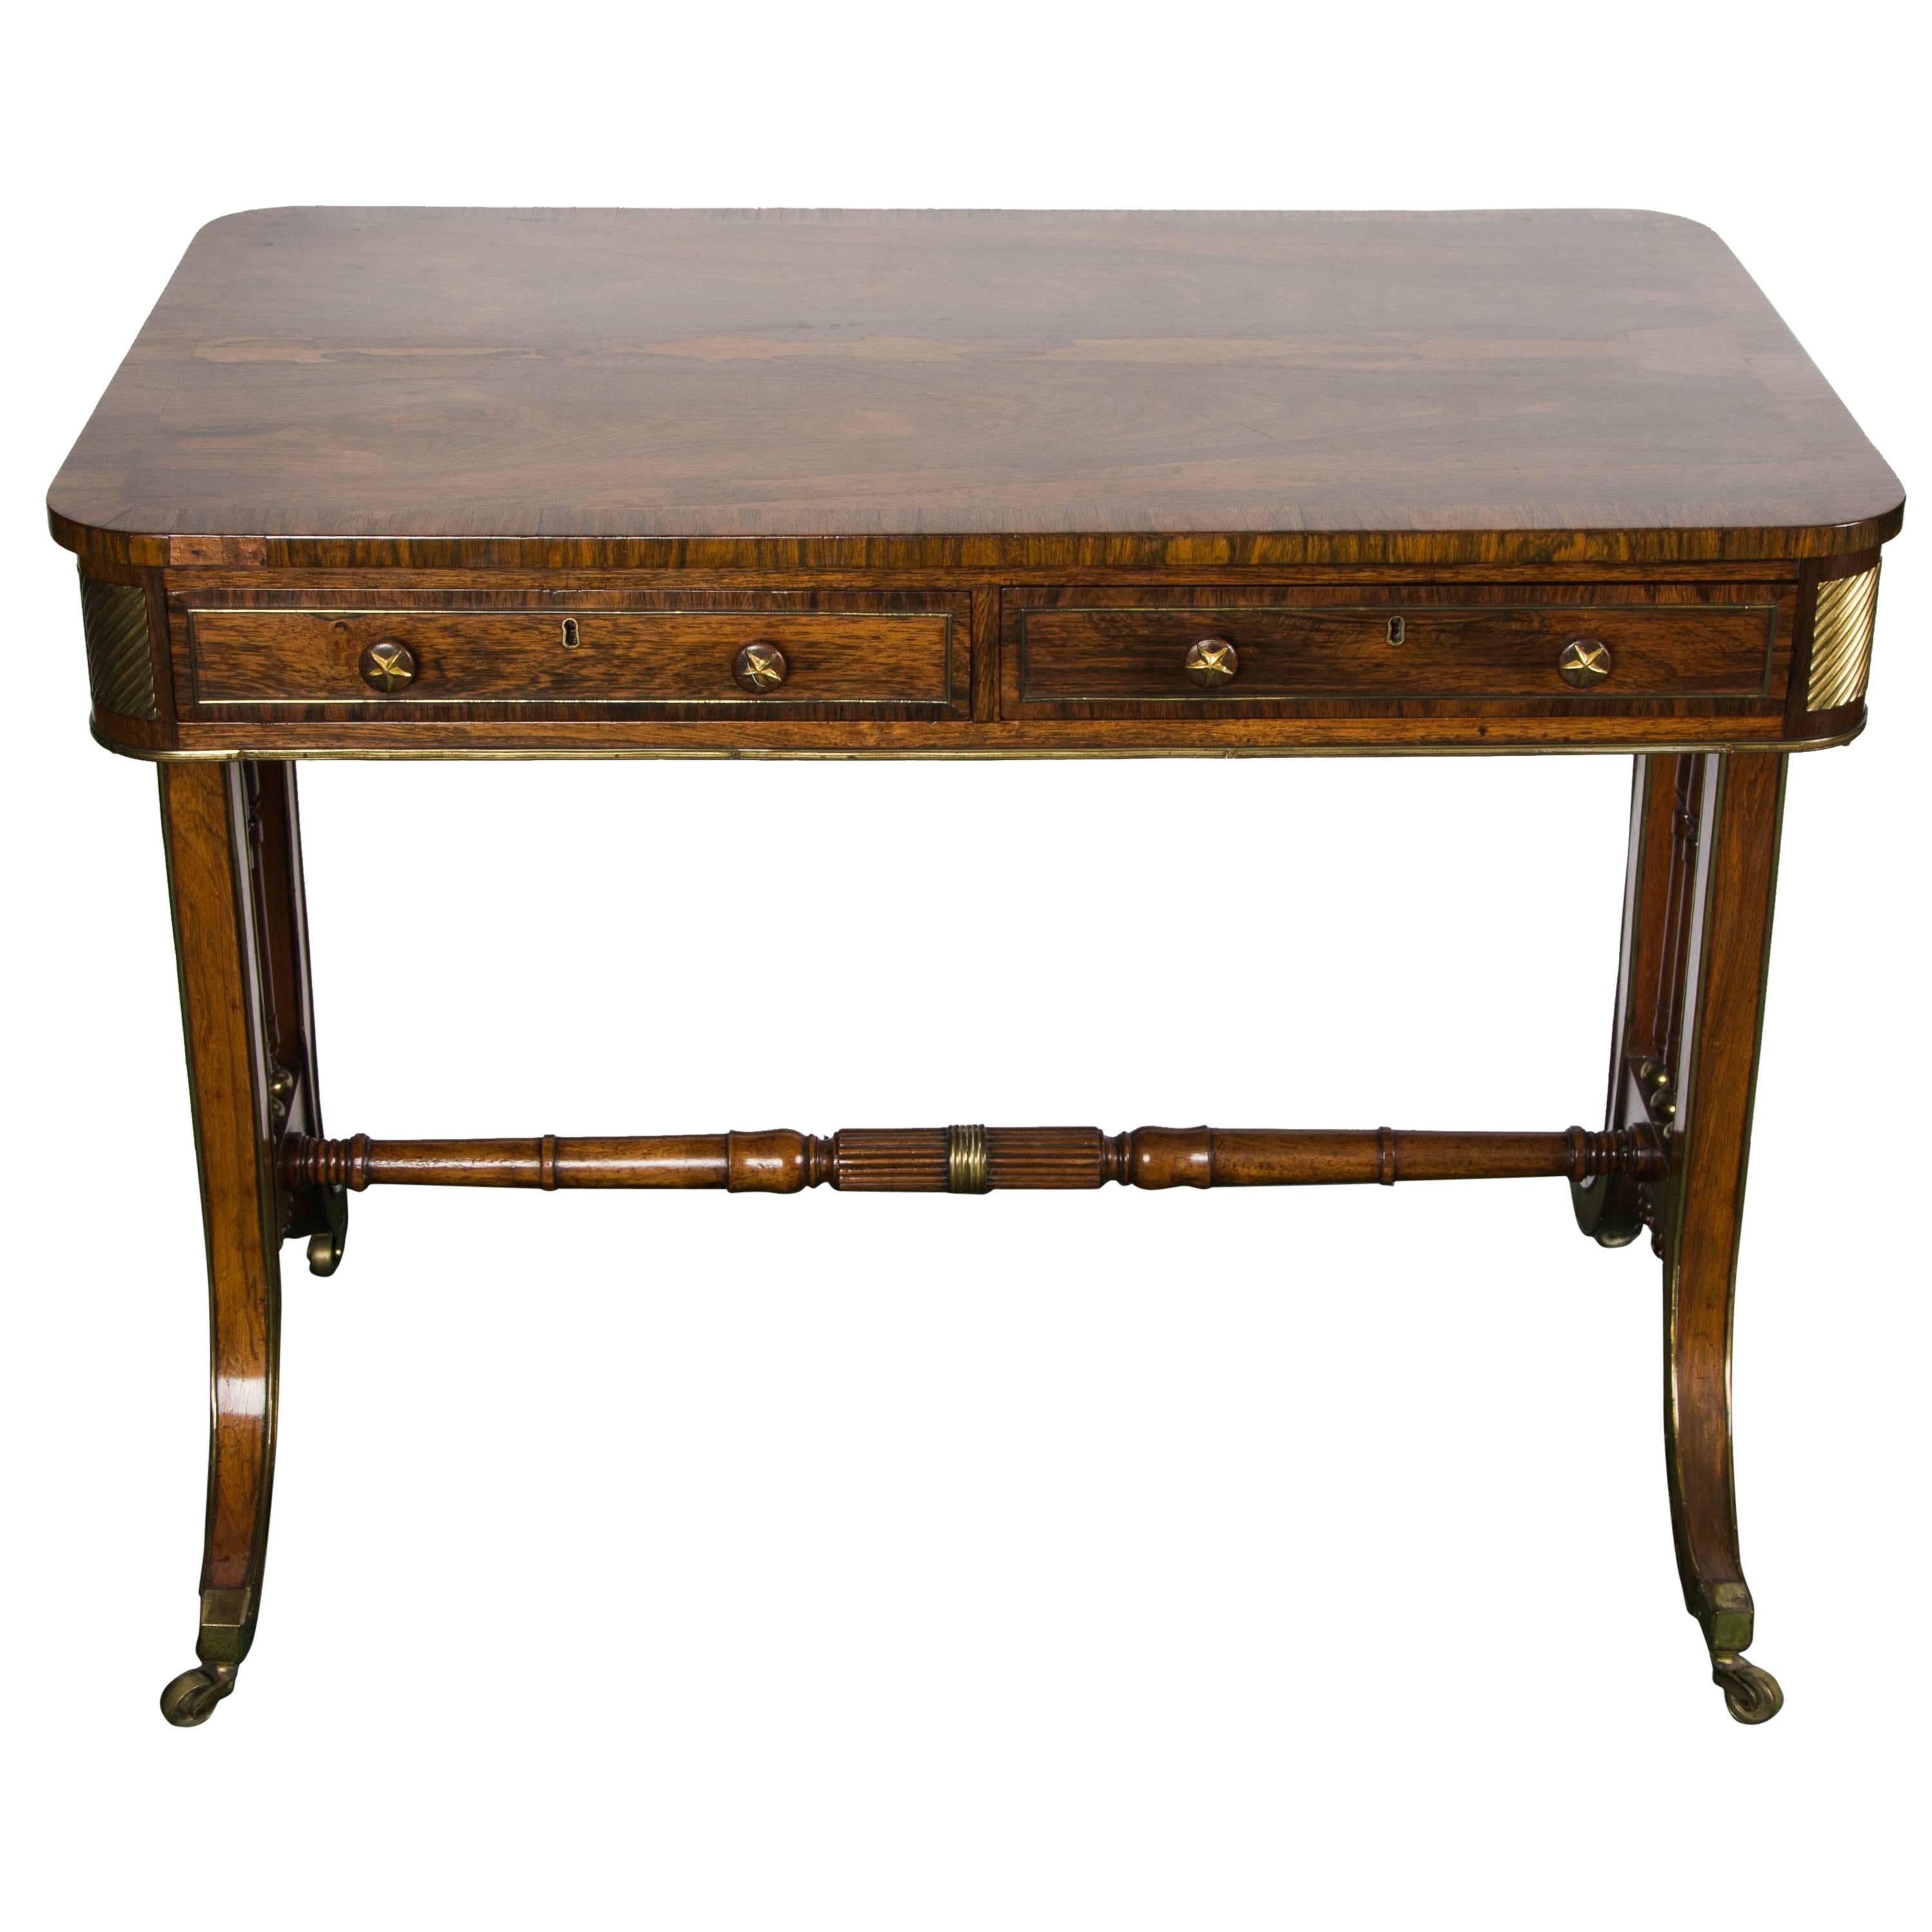 A very good quality Regency period rosewood crossbanded, end support, library table. Having two frieze drawers, dummy drawers to the reverse, ormolu mounts to each corner, ormolu mounted scrolls above the end supports, out swept legs terminating in